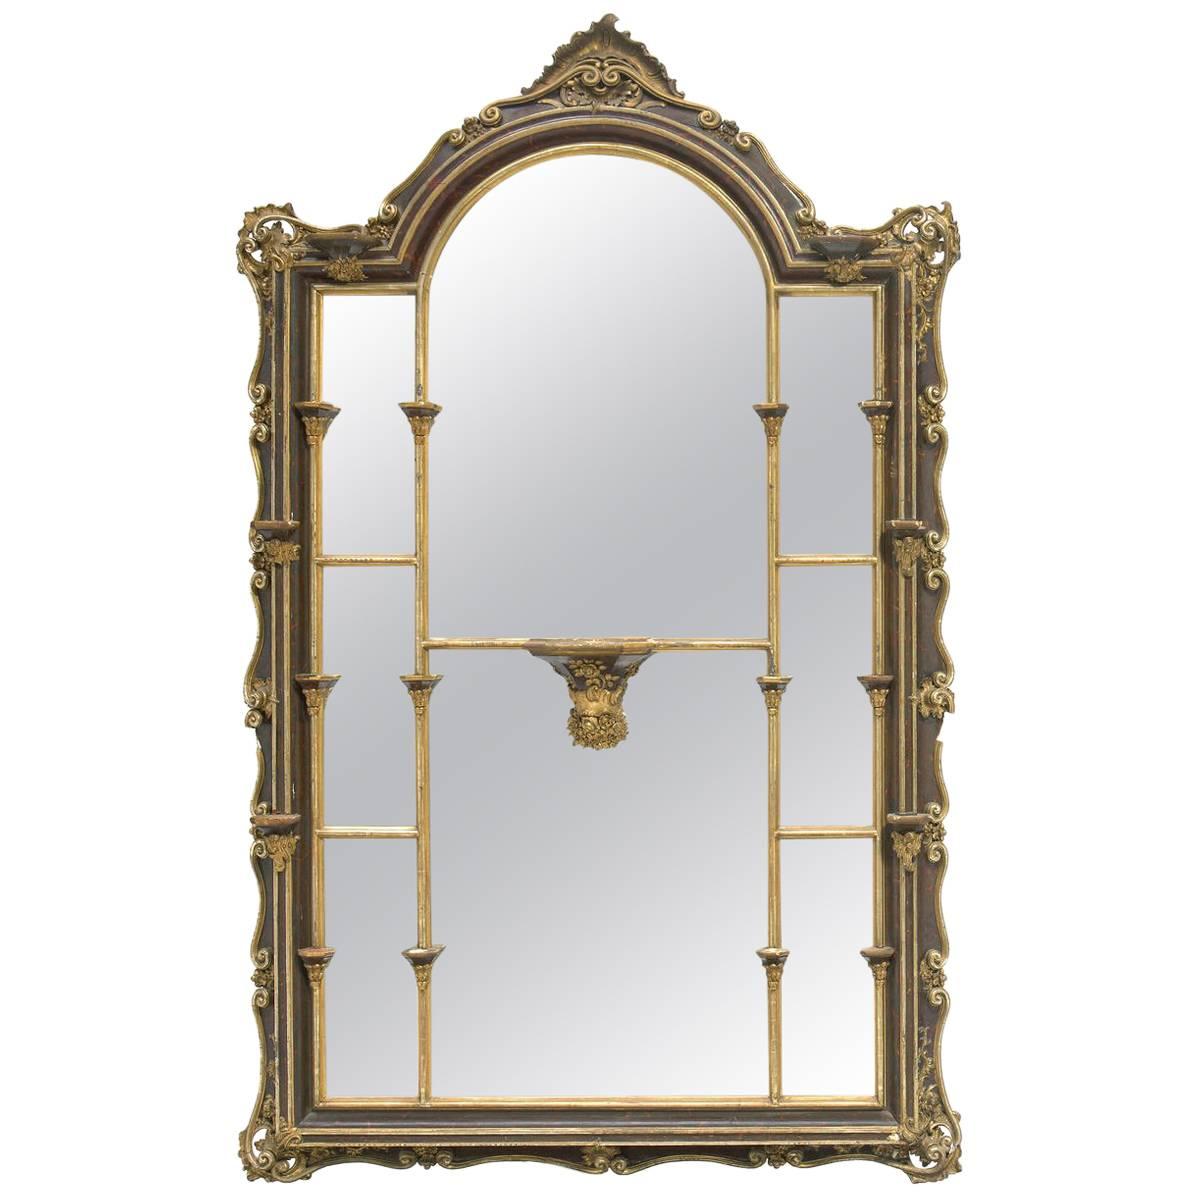 Large Italian Faux Tortoiseshell Painted Mirror, 19th Century For Sale